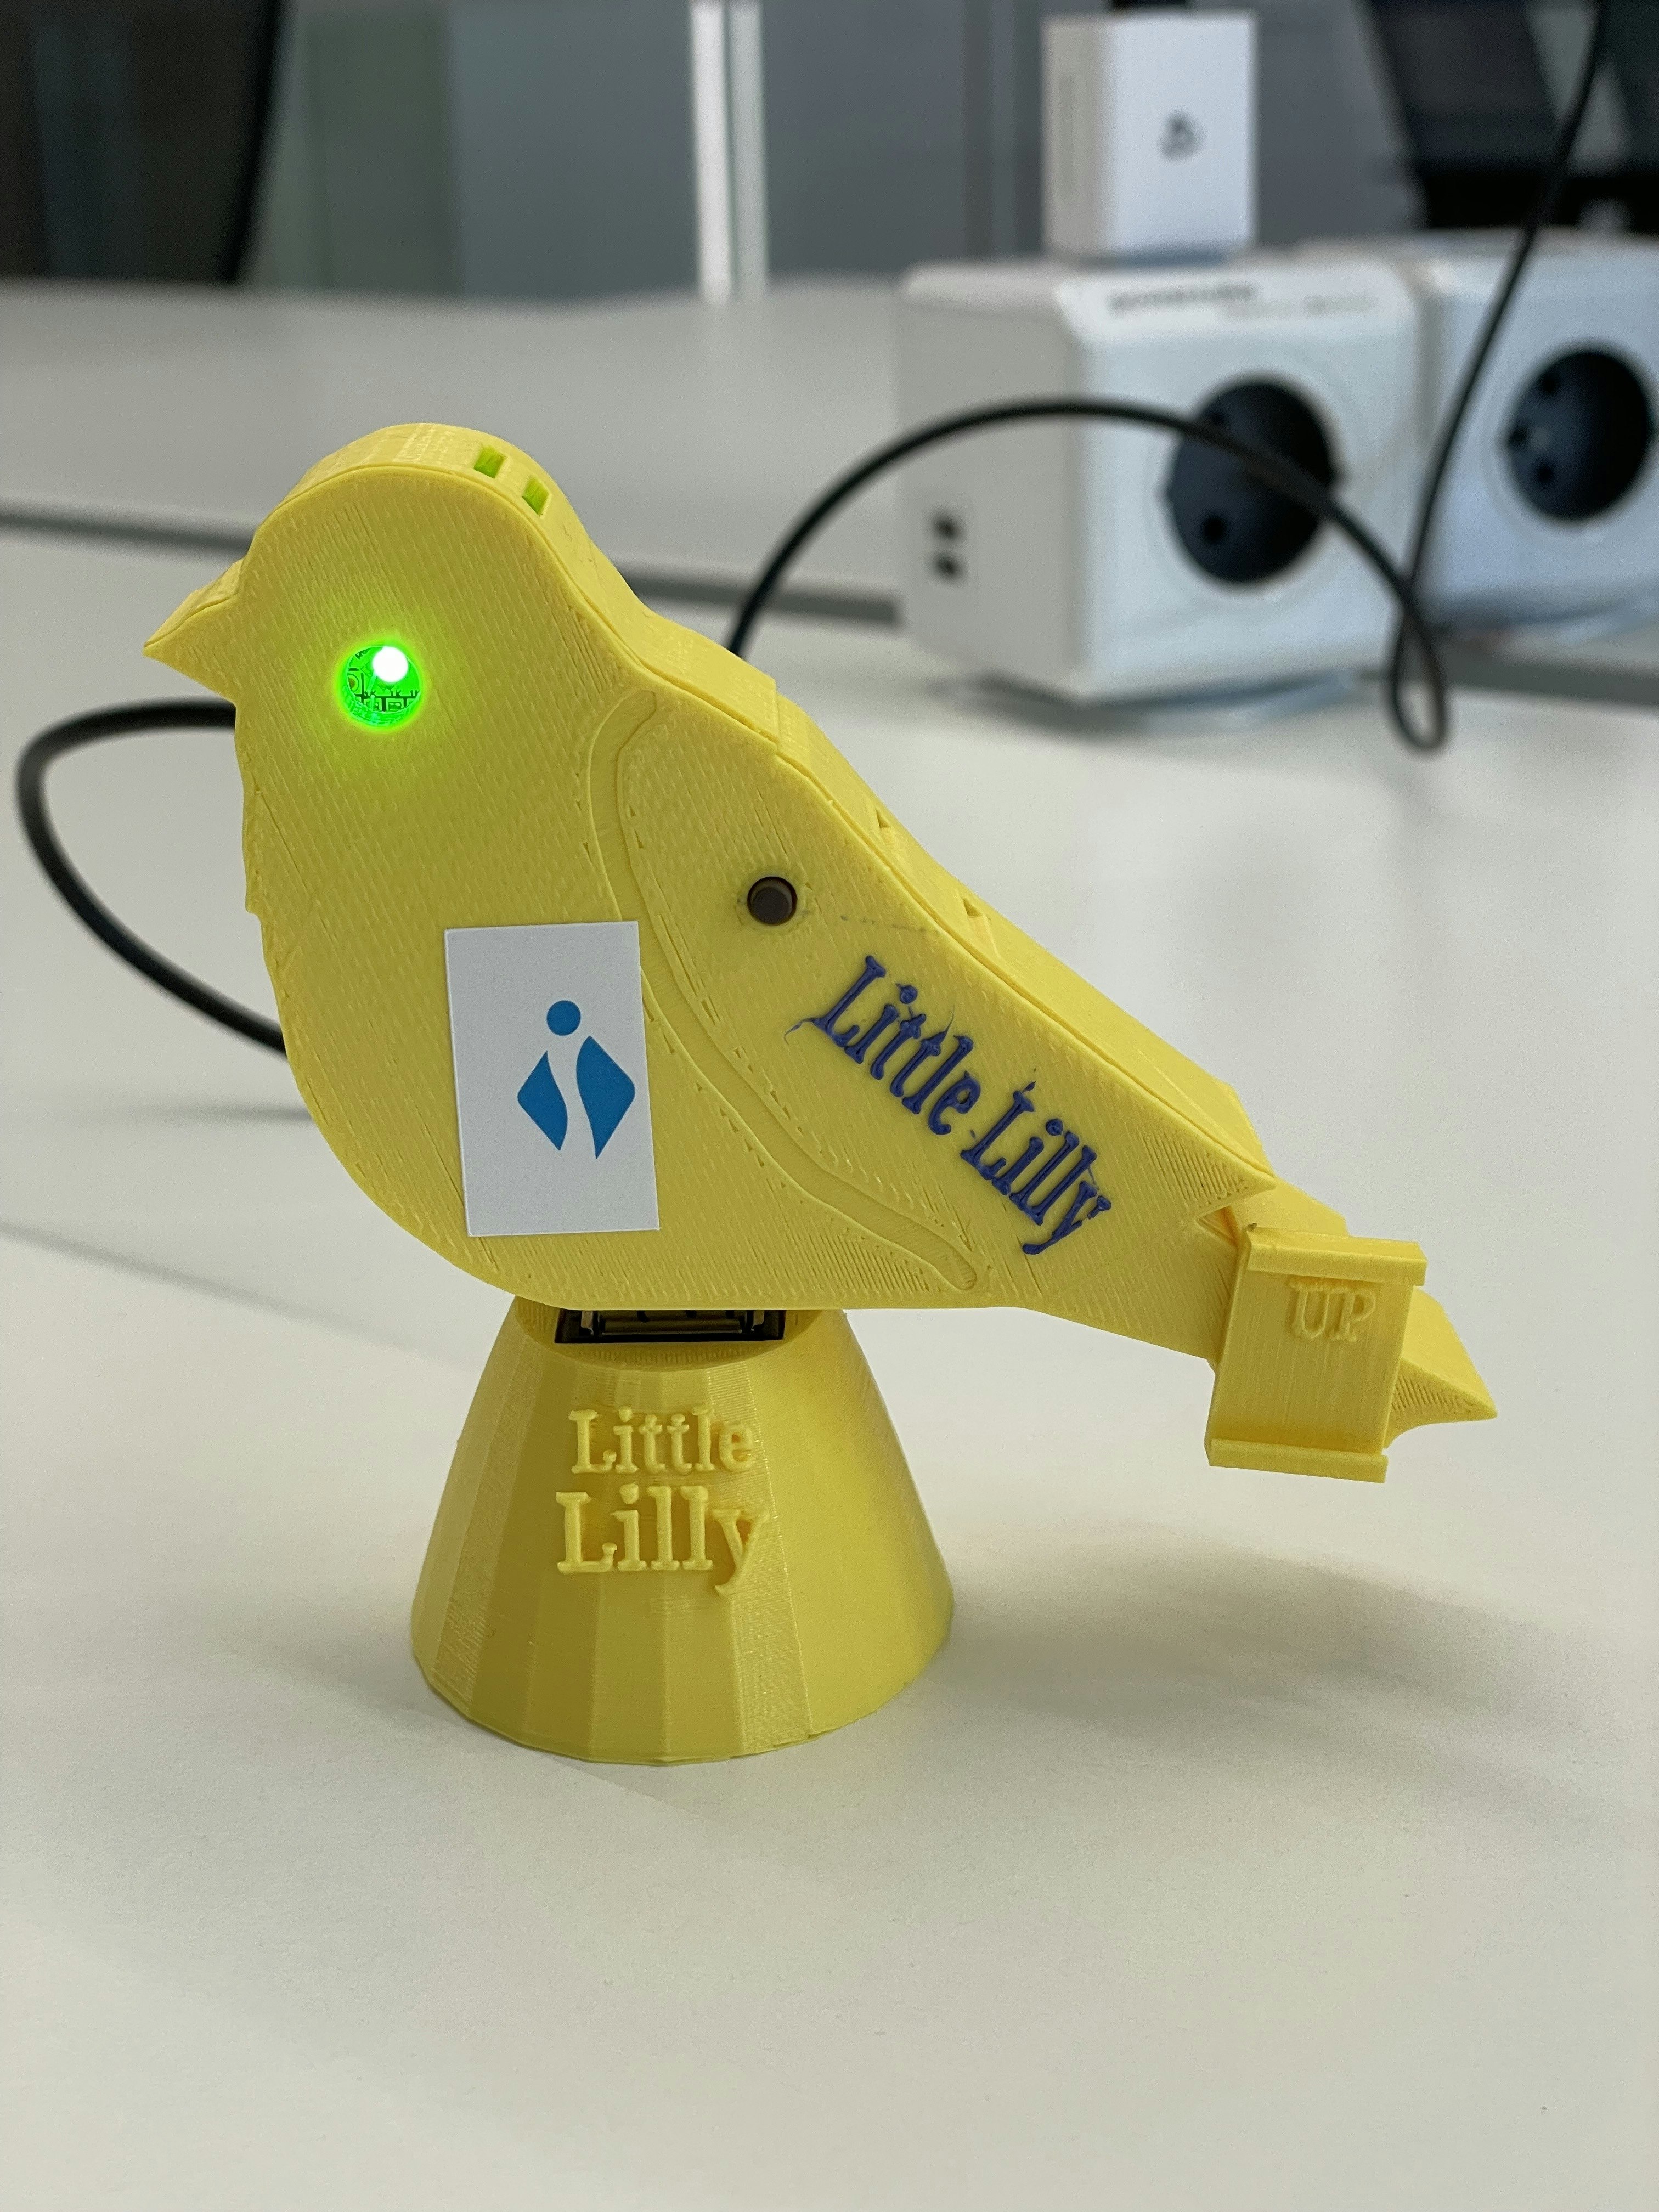 Picture of 'Little Lilly': a yellow device in the shape of a canary with a green or red LED to signal good or bad air quality around the device